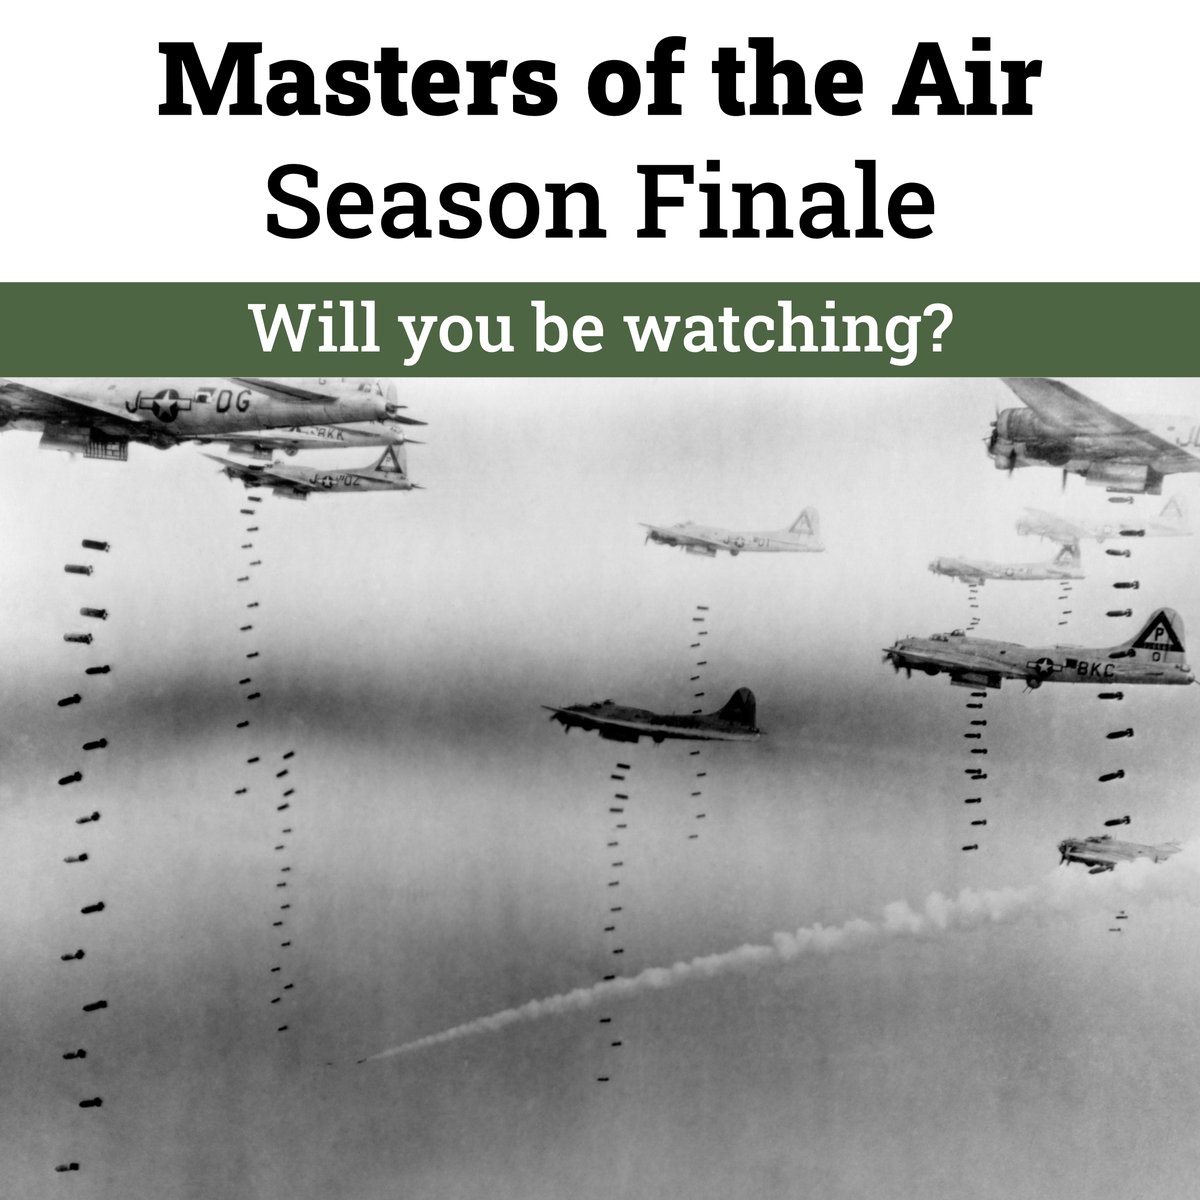 The finale of the much-anticipated #WW2 drama miniseries, #MastersOfTheAir, is out now – will you be watching? The series follows the true story of the US 8th Air Force’s 100th Bomb Group, and if you’re yet to add it to your watch list, we highly recommend you do!